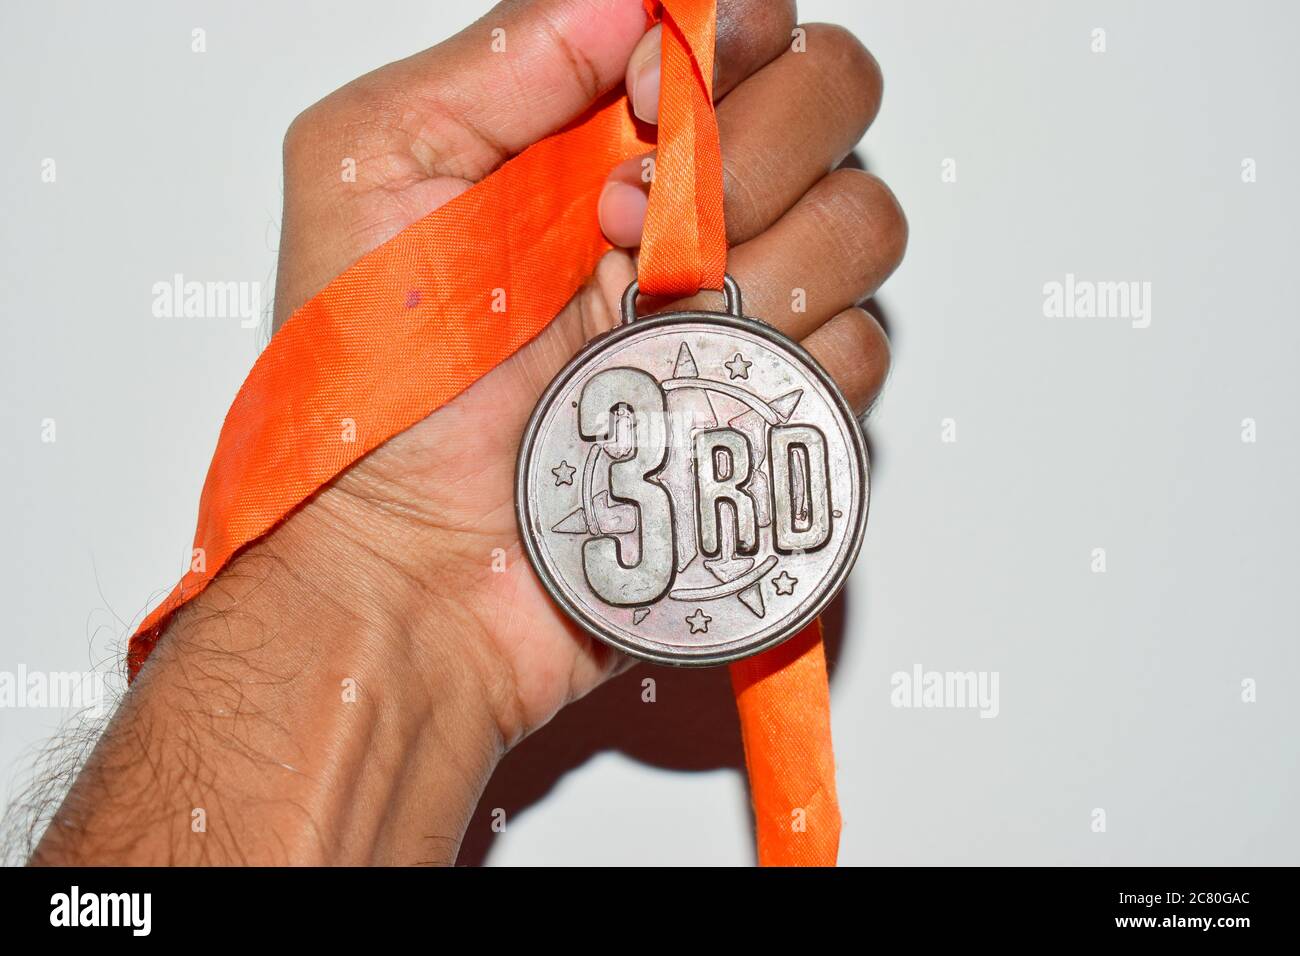 human hand holding a bronze medal close up Stock Photo